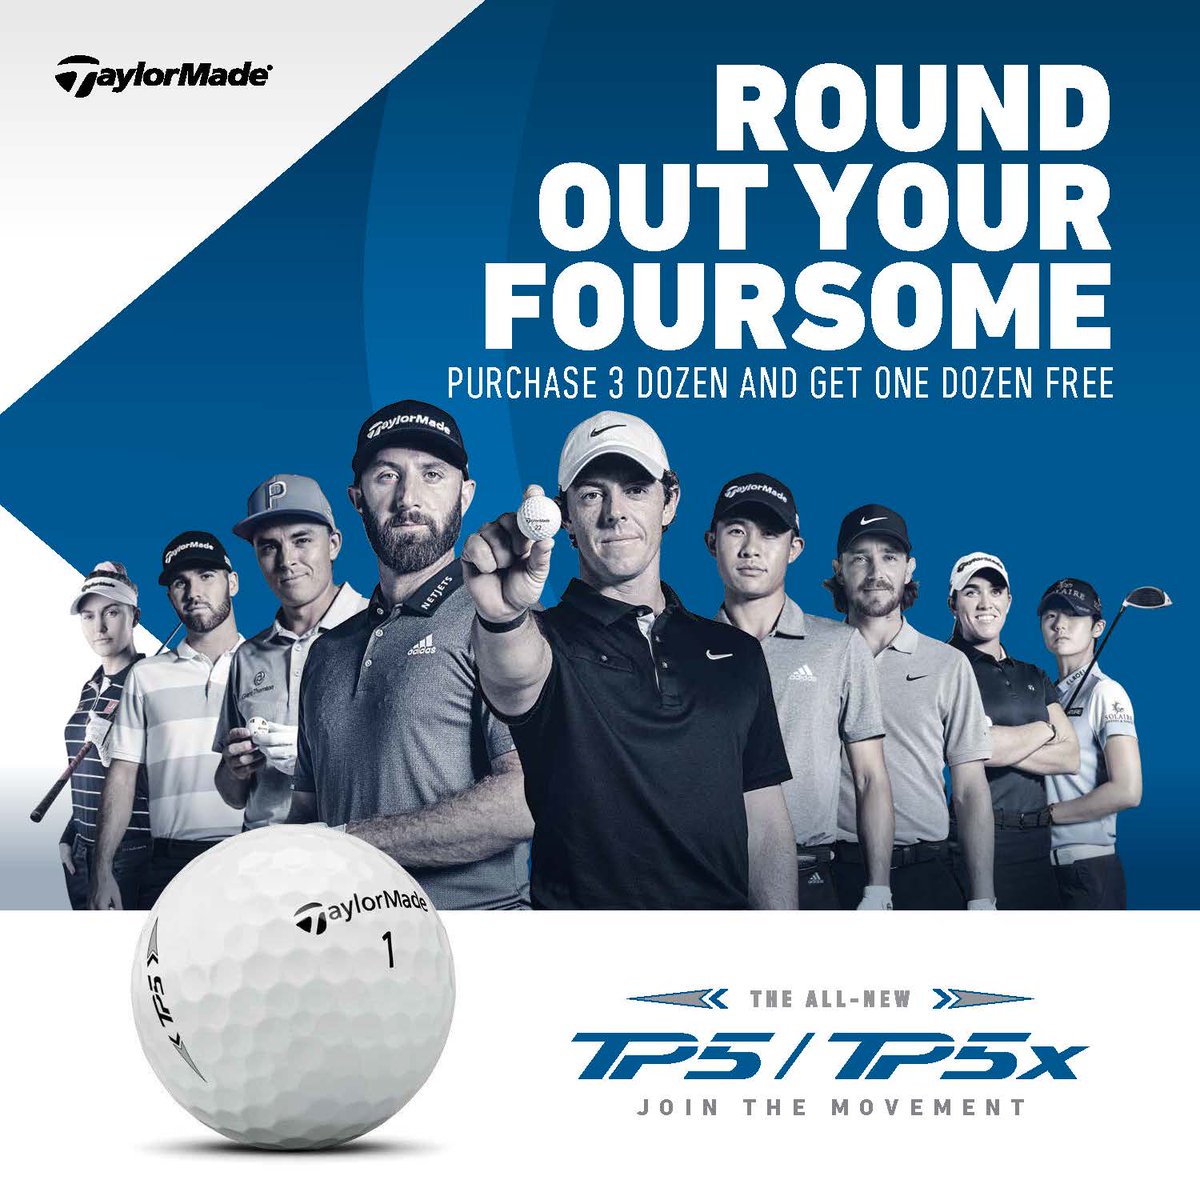 The ROUND OUT YOUR FOURSOME promo is happening now at the SAGC. Purchase 3 dozen #TP5 or #TP5X at regular price & receive 1 dozen at no extra charge & personalization is FREE! Hurry this offer ends, April 15. Call the Golf Shop to order yours today at (250)832-4727. @TaylorMadeCA